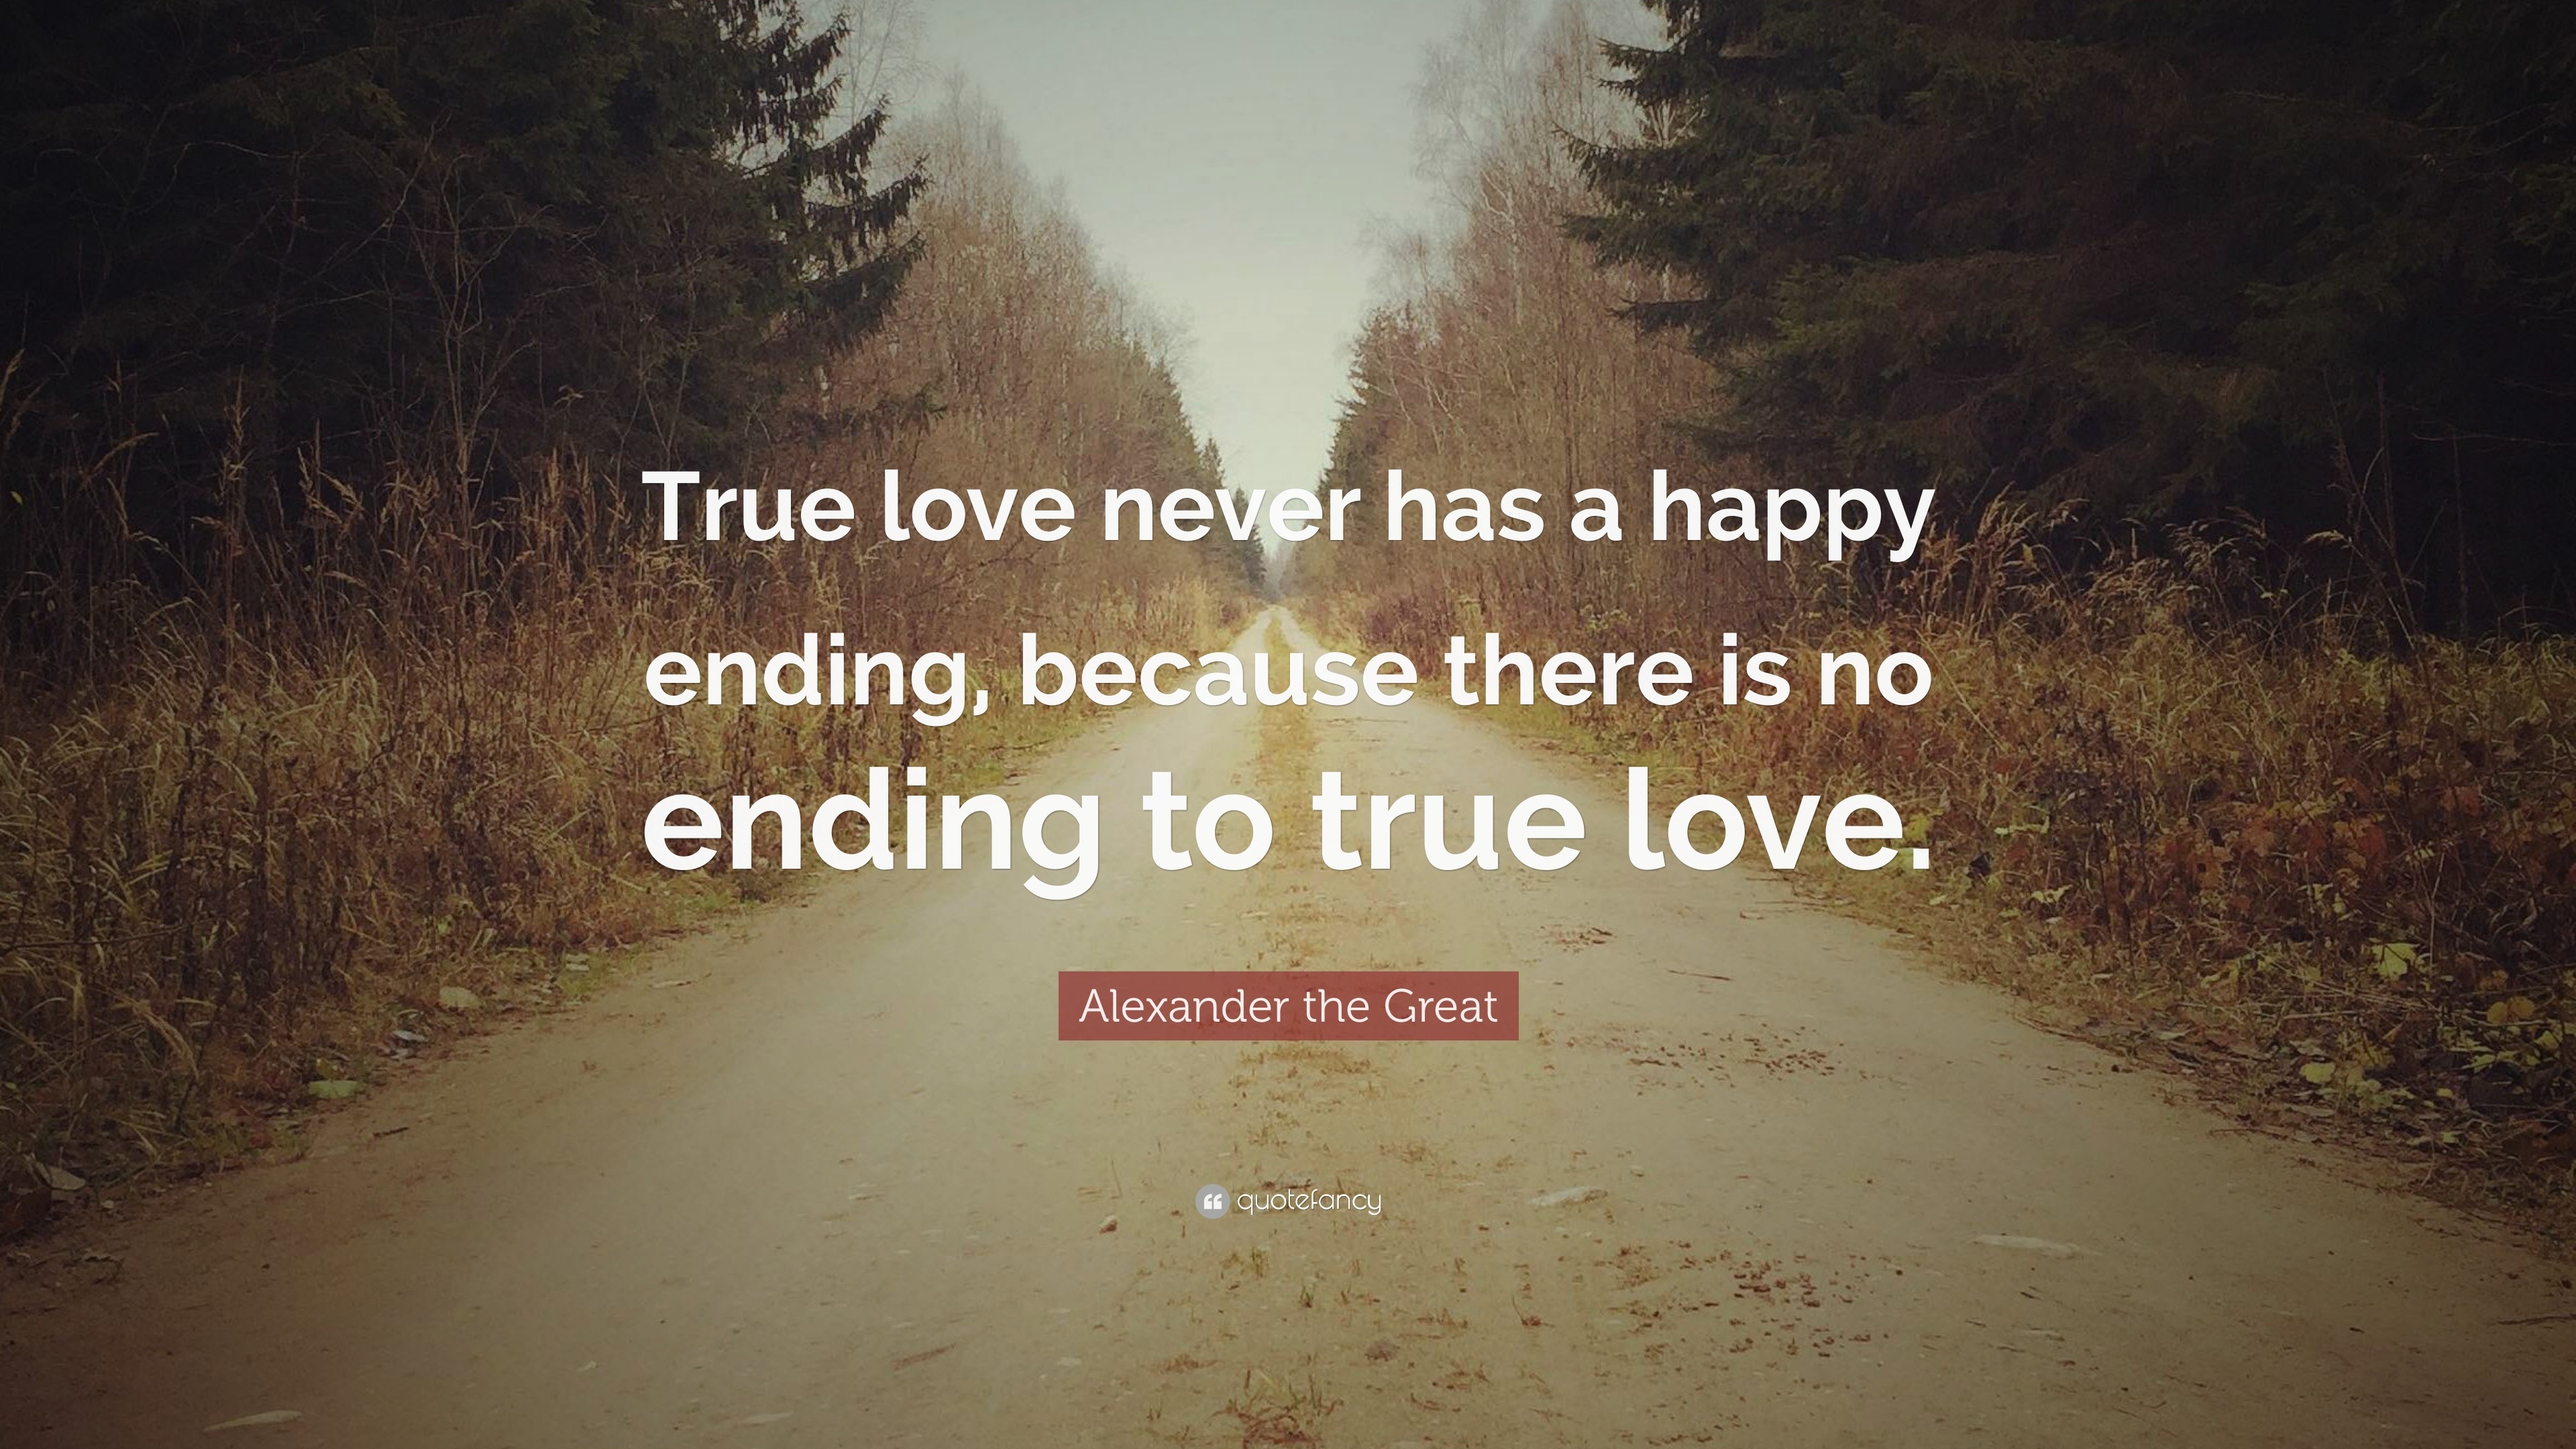 Alexander the Great Quote: “True love never has a happy ending, because ...